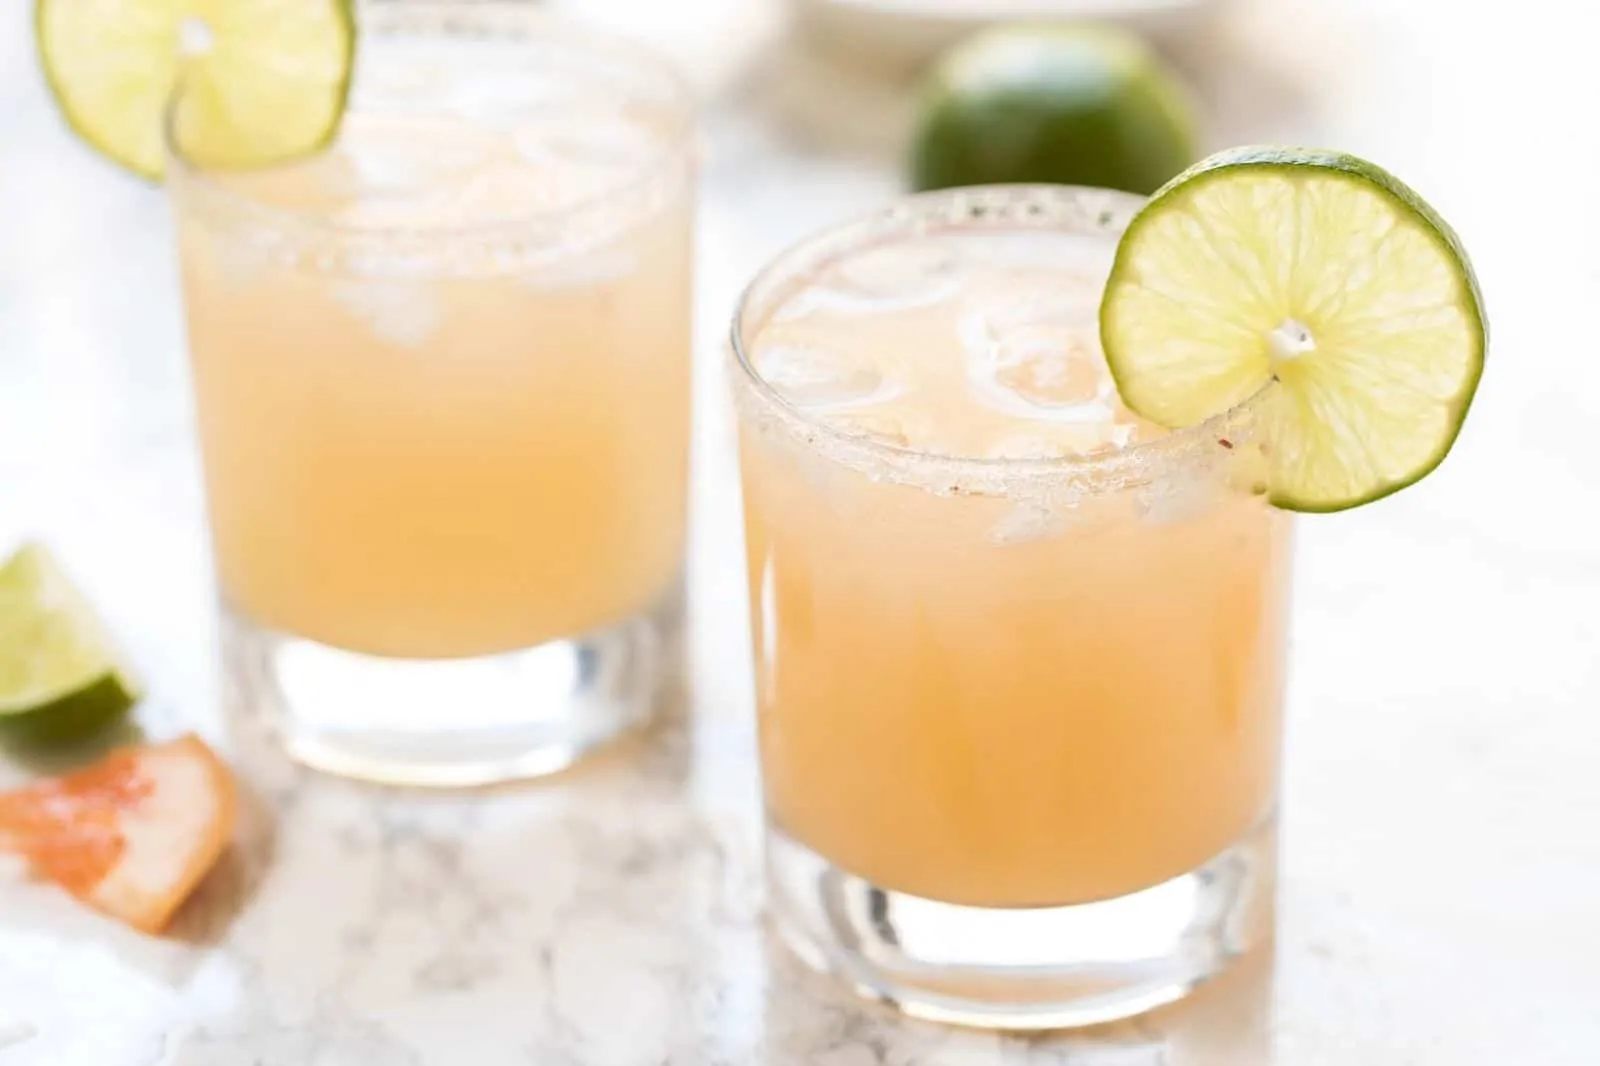 Two grapefruit margaritas in glasses with lime slices